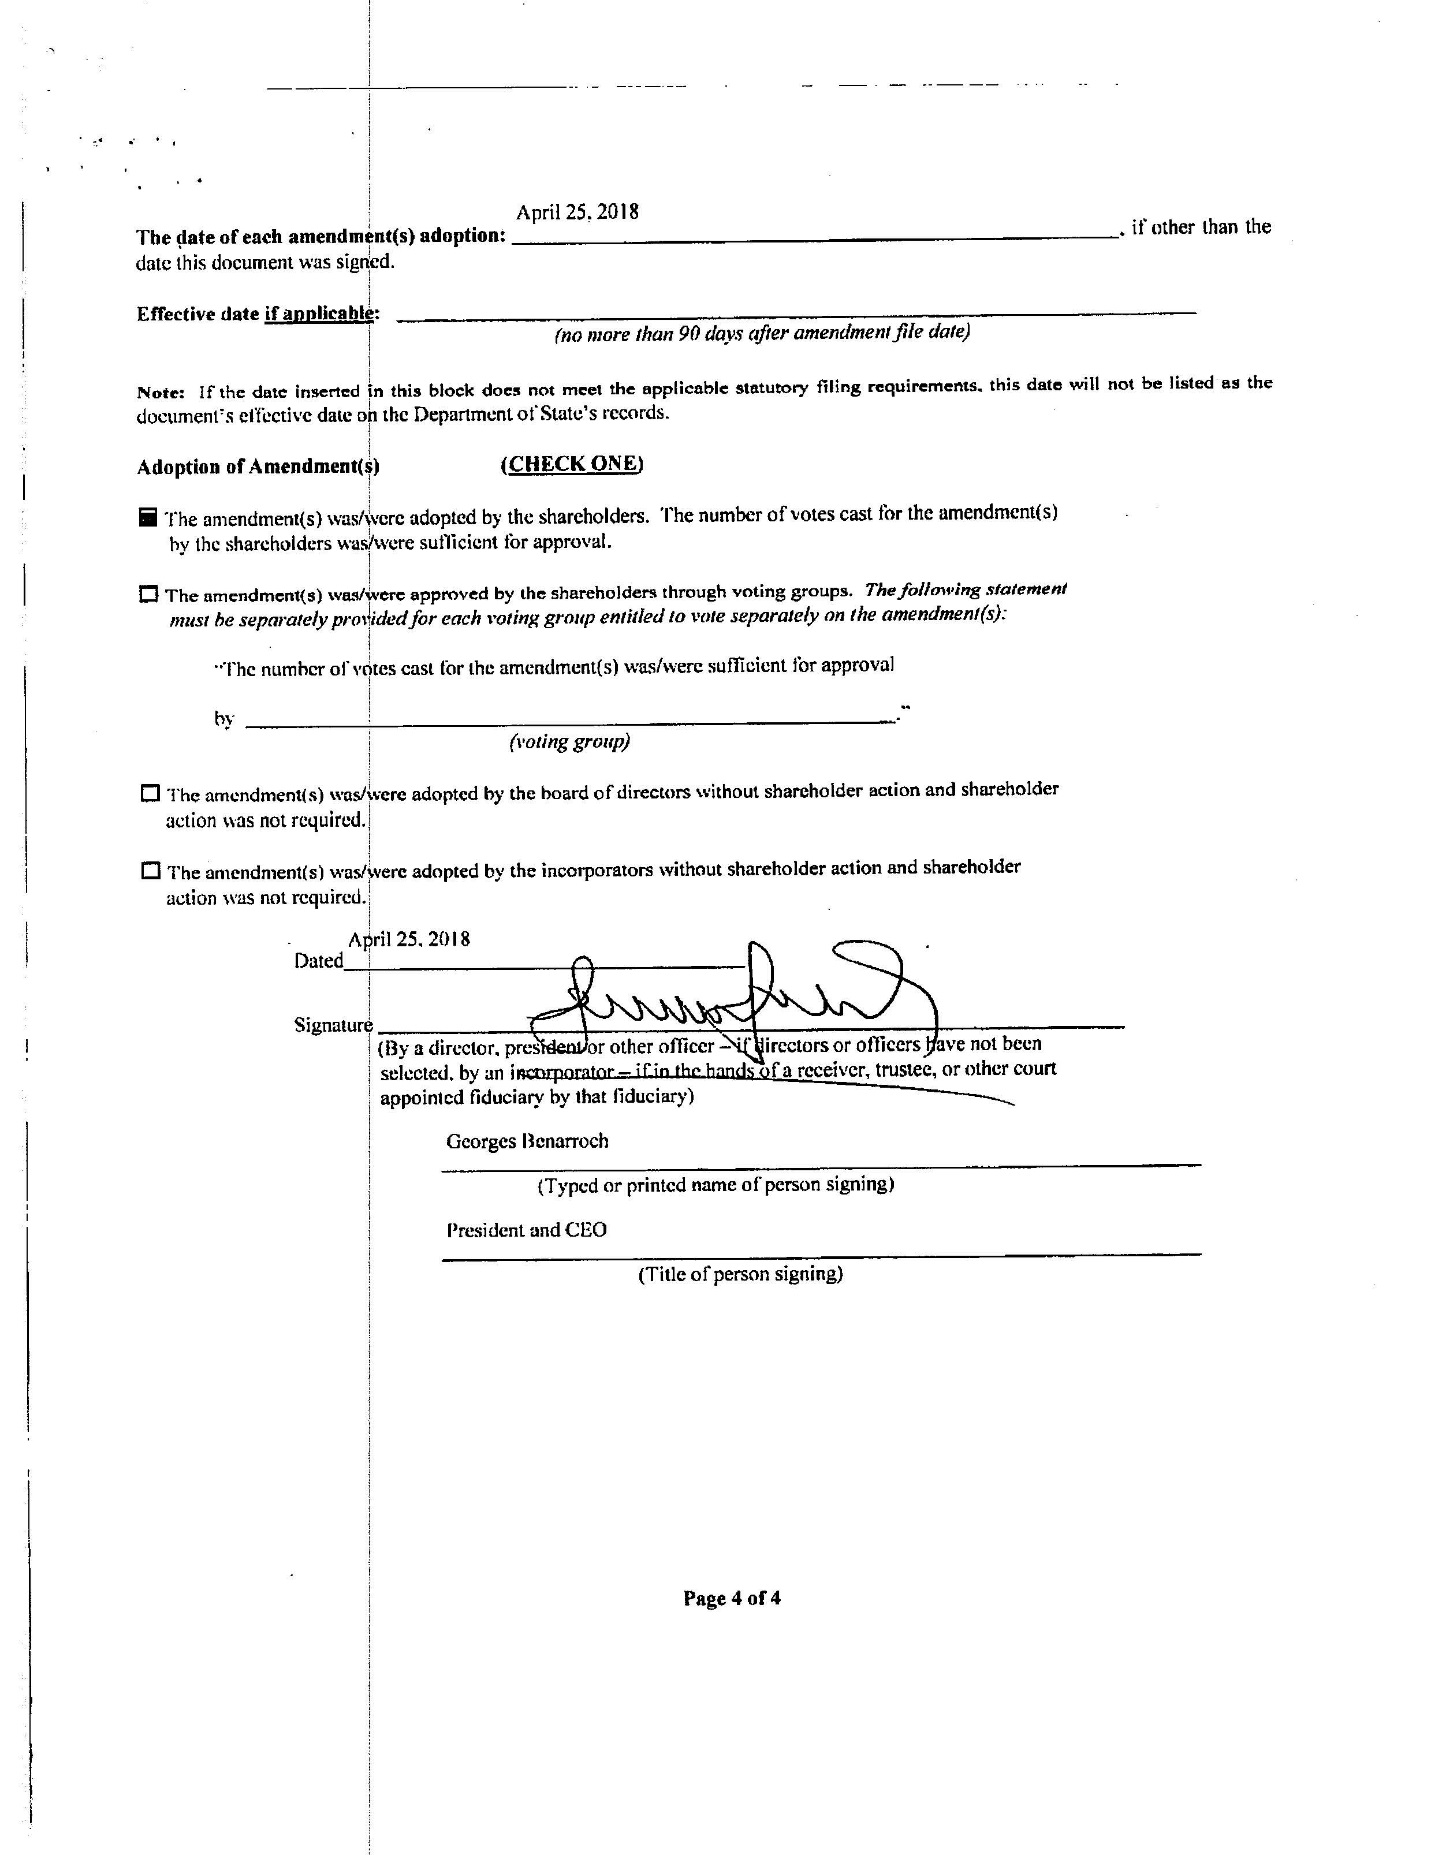 Third Amended Articles of Incorporation_Page_09.jpg